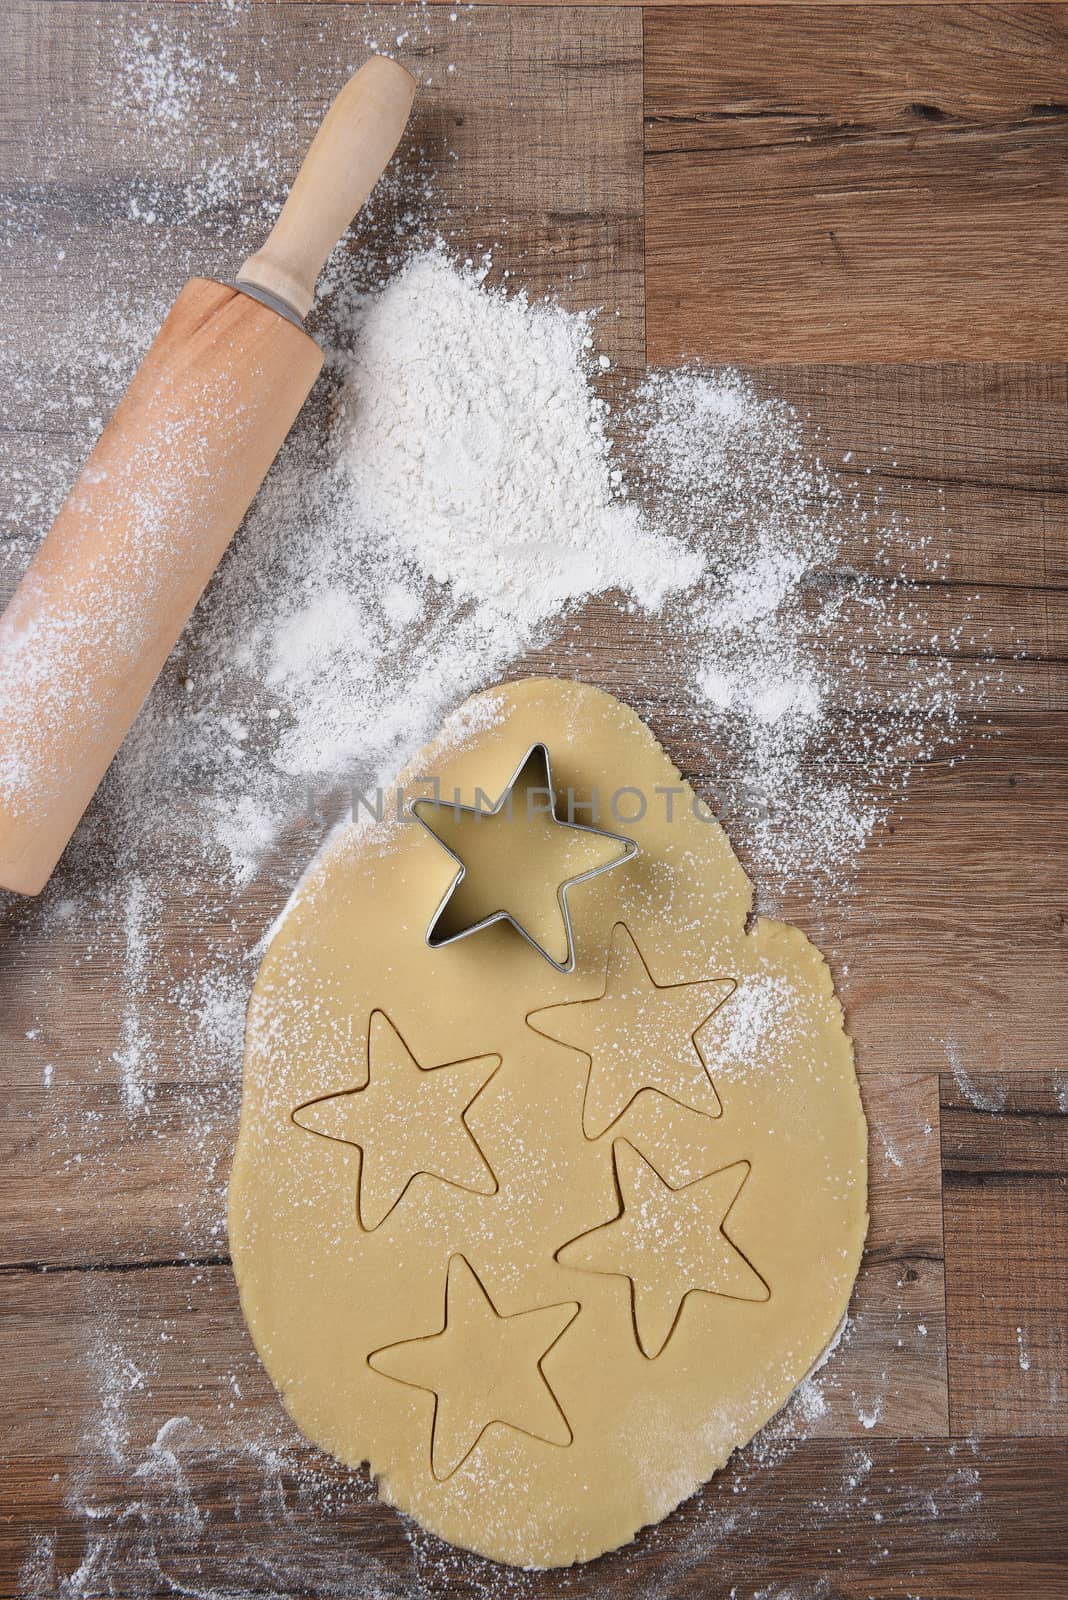 Making Star Shaped Holiday Cookies by sCukrov